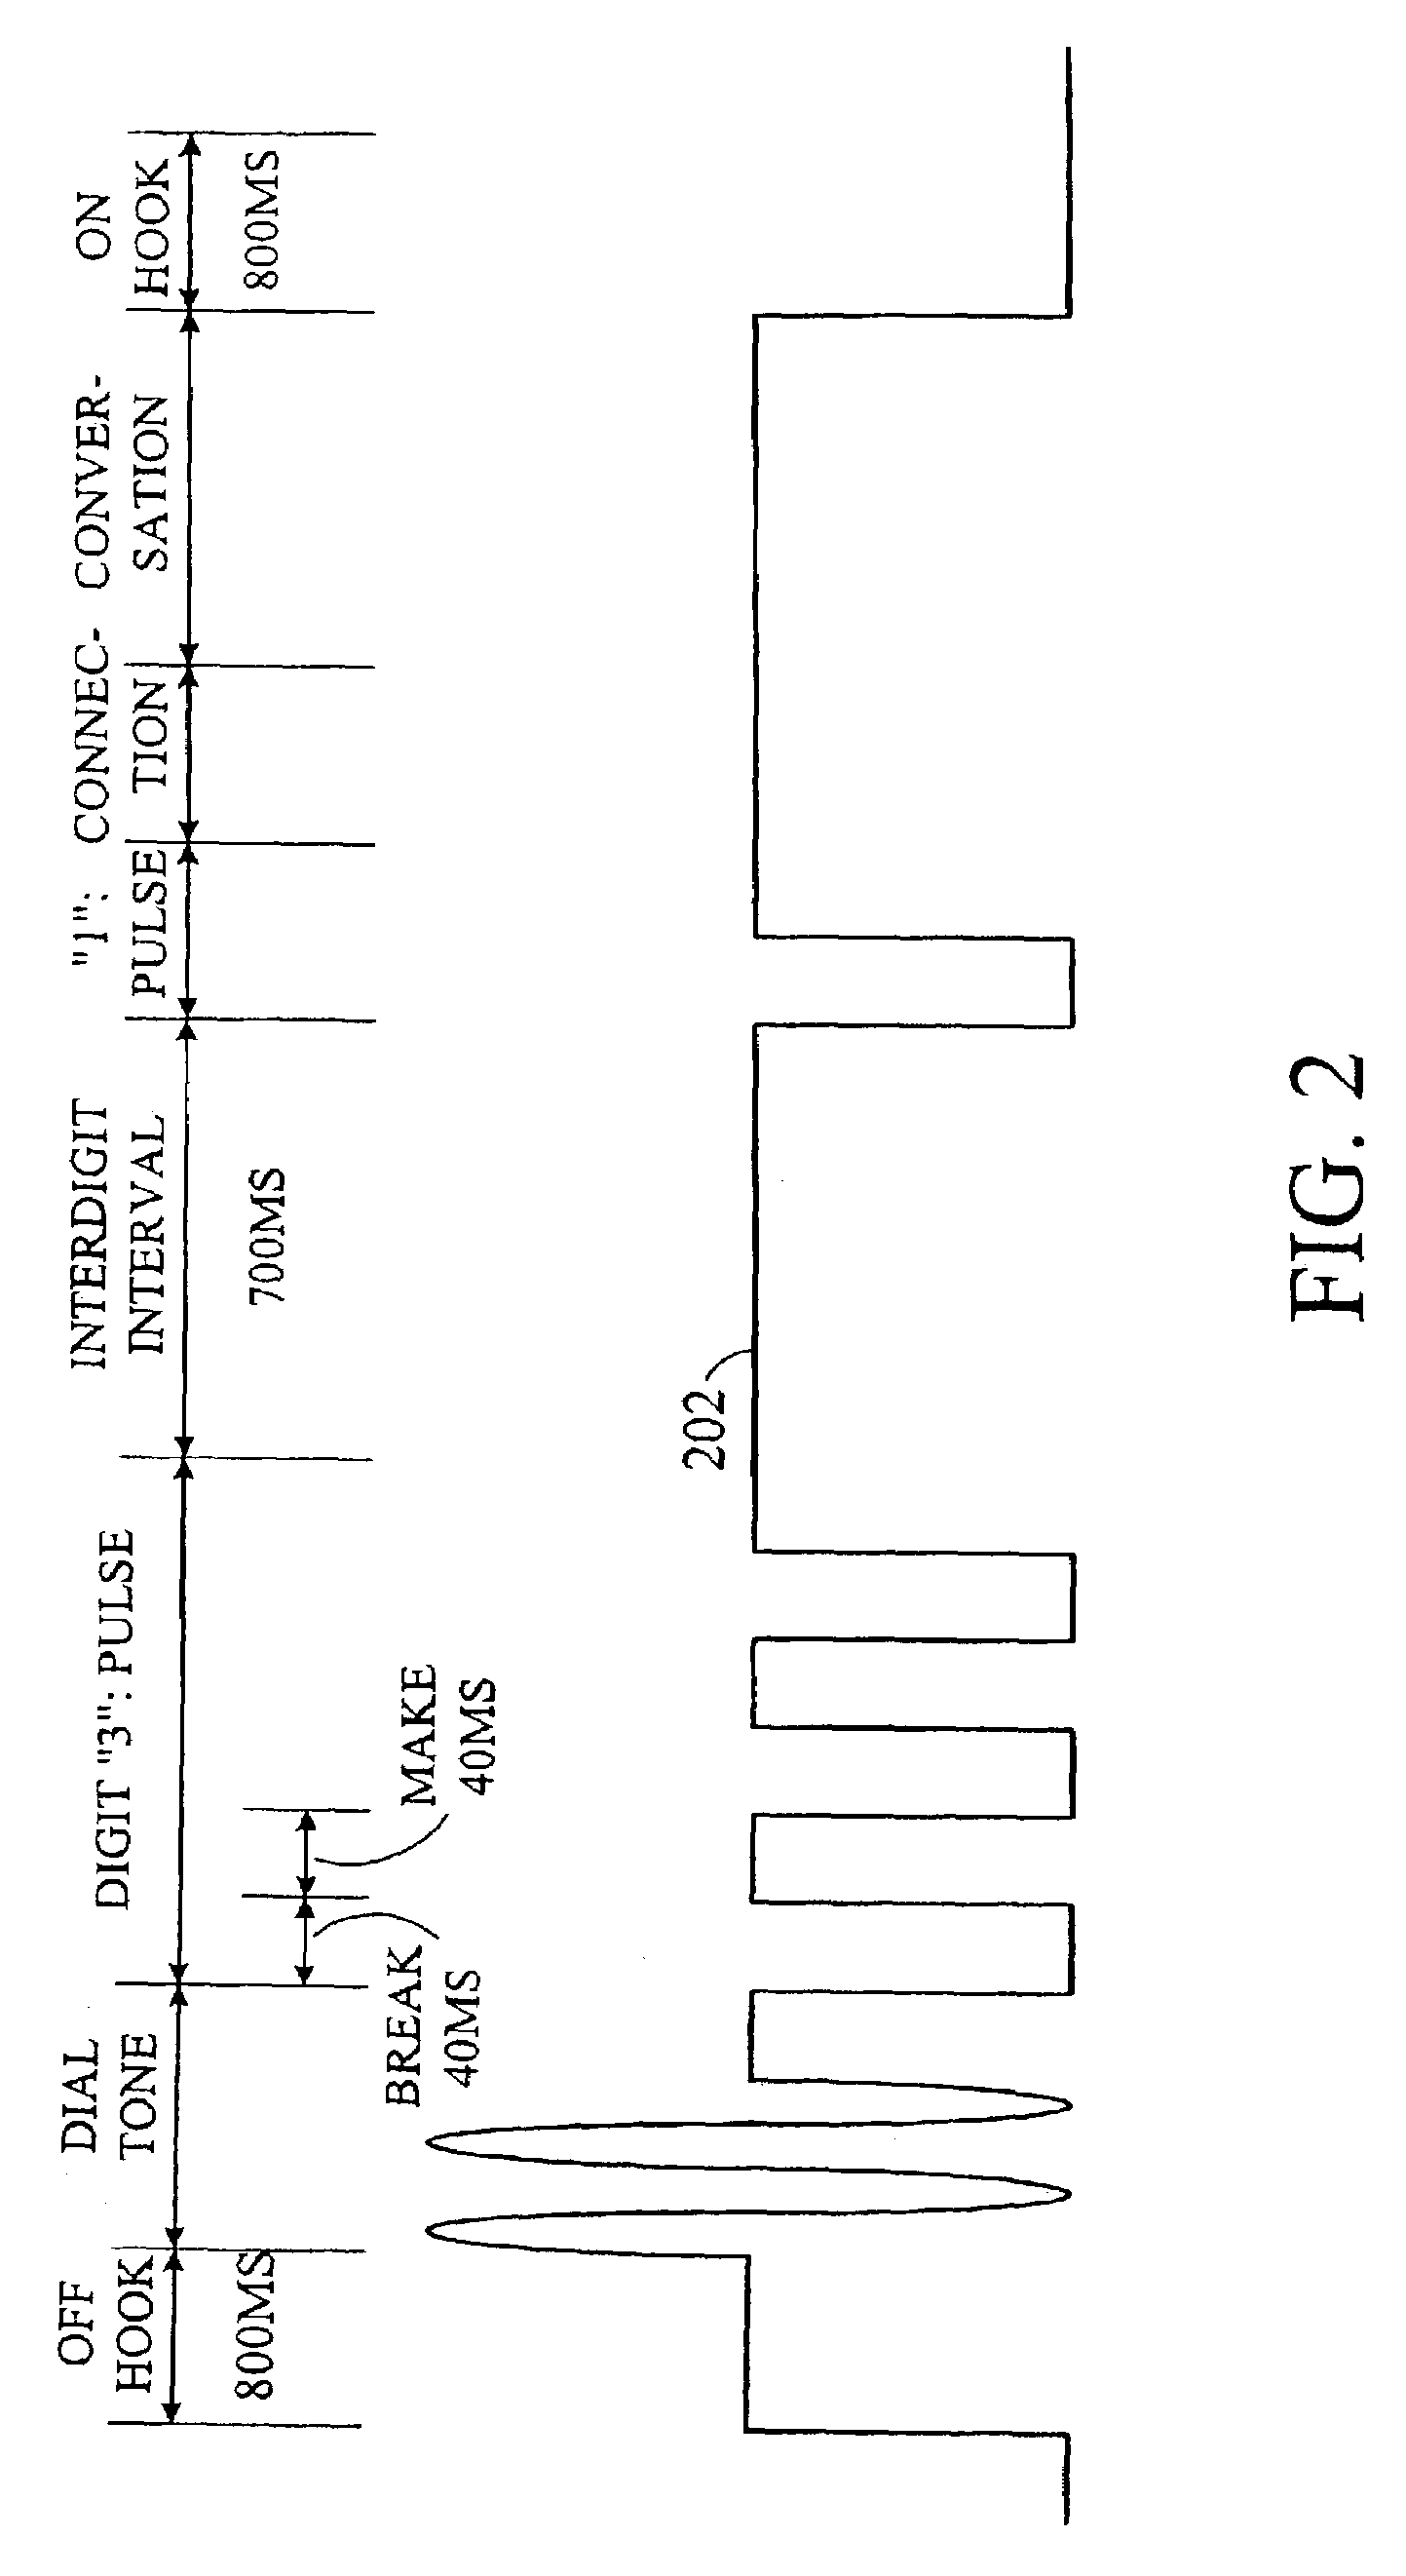 System and method for providing universal access to voice response systems